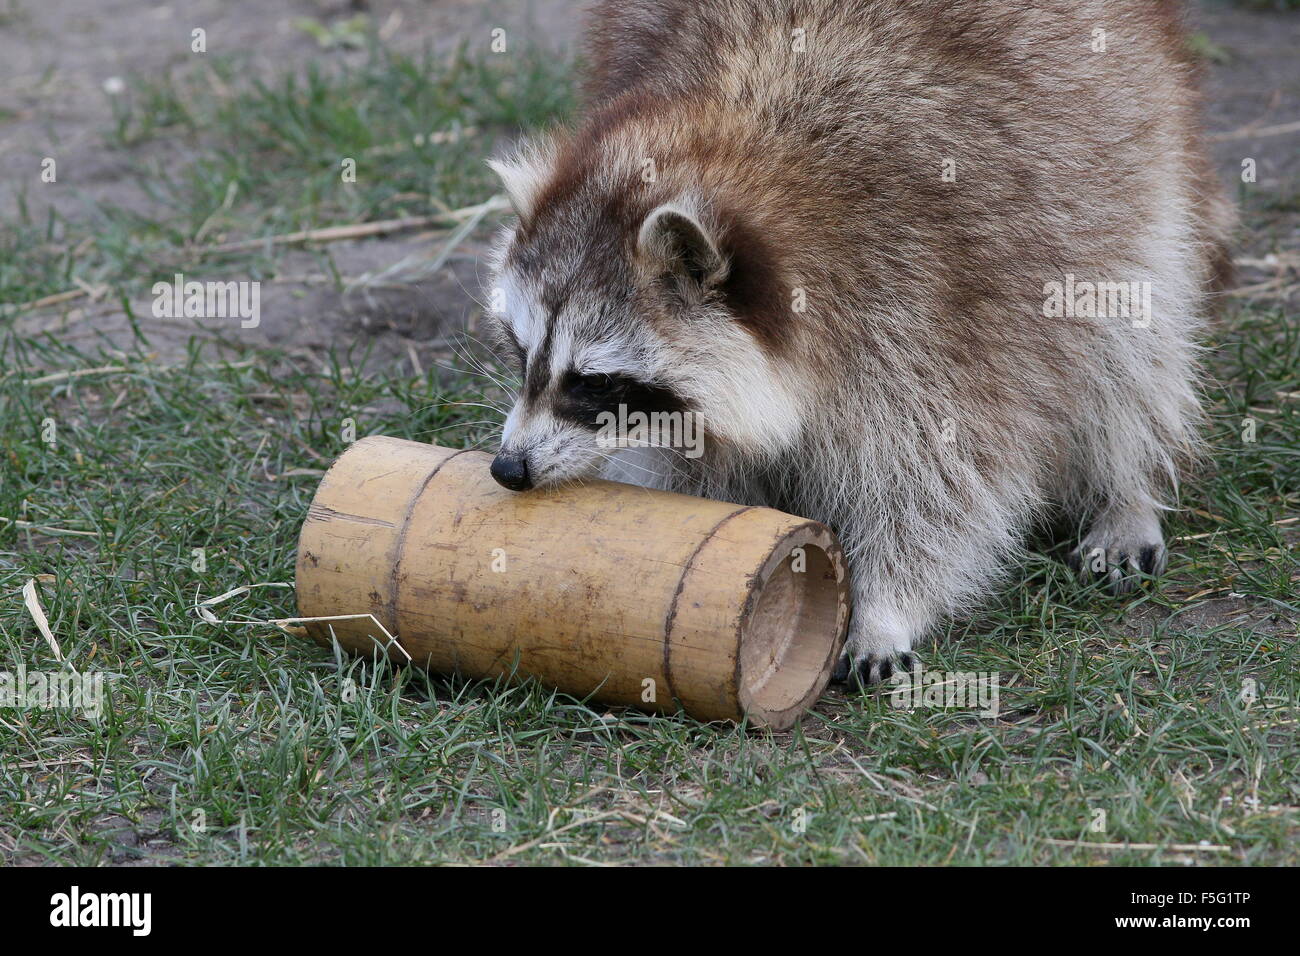 North American raccoon (Procyon lotor) trying to extract a snack from a bamboo container at Rotterdam Blijdorp Zoo, Netherlands Stock Photo